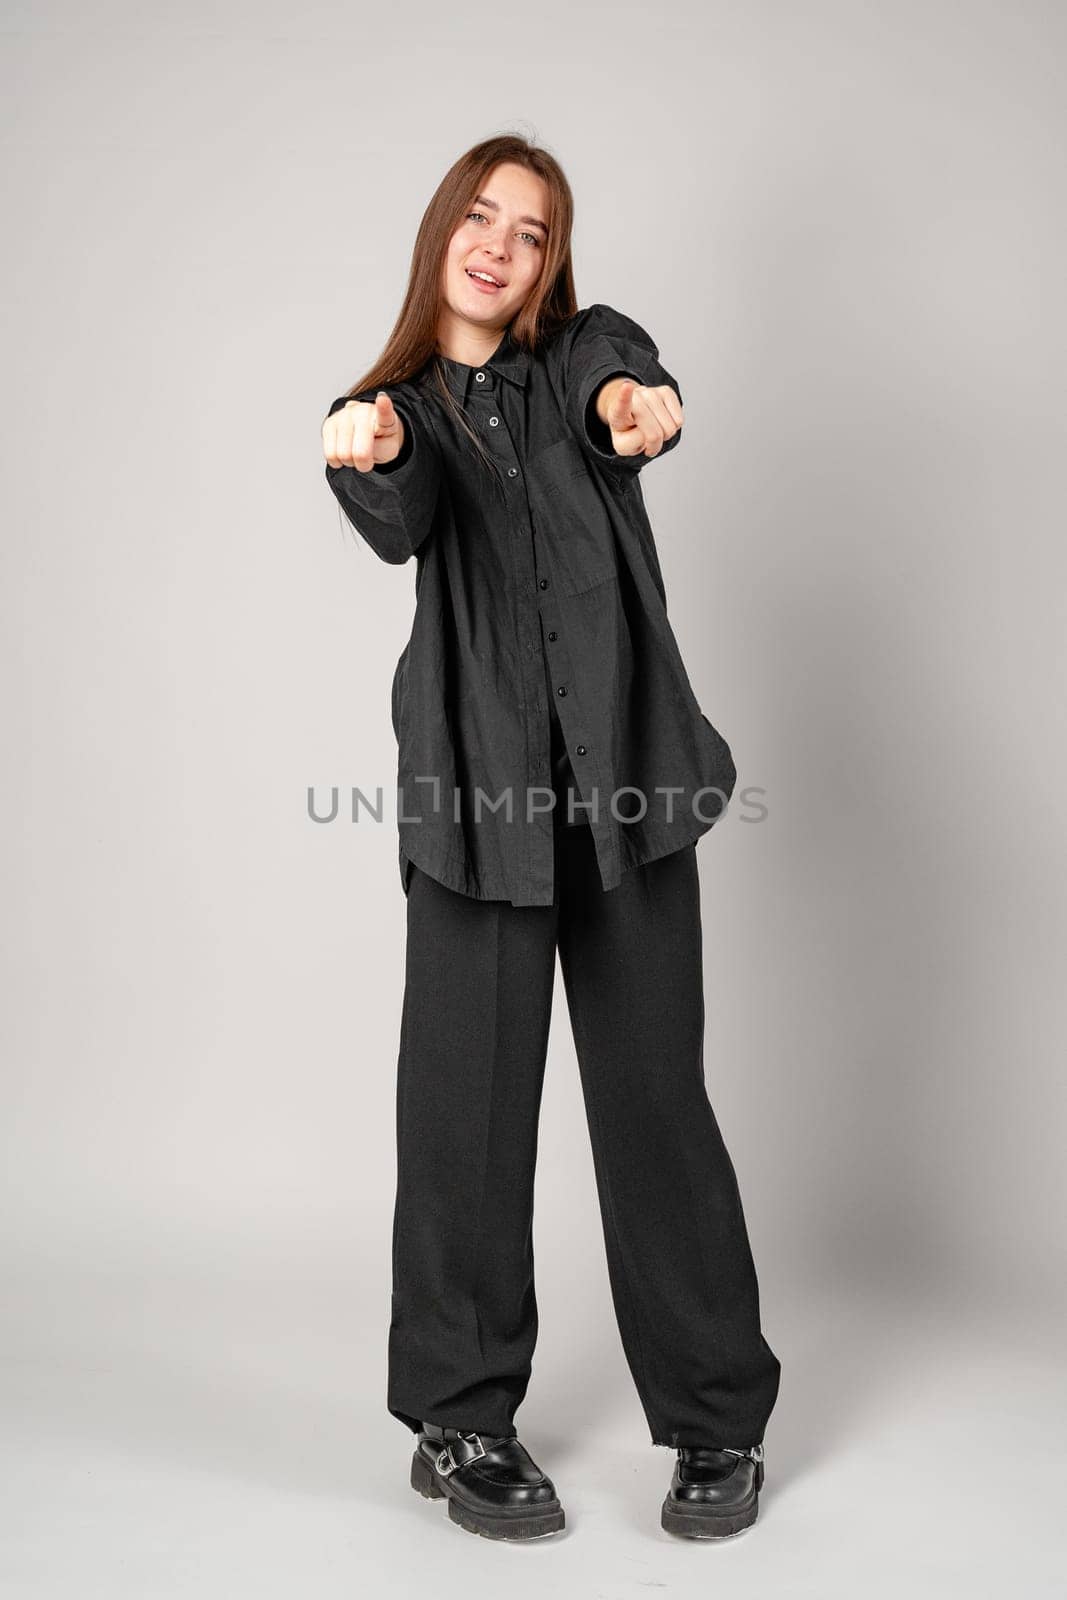 Young Woman Gesturing With Hands In Frame Against Plain Background close up